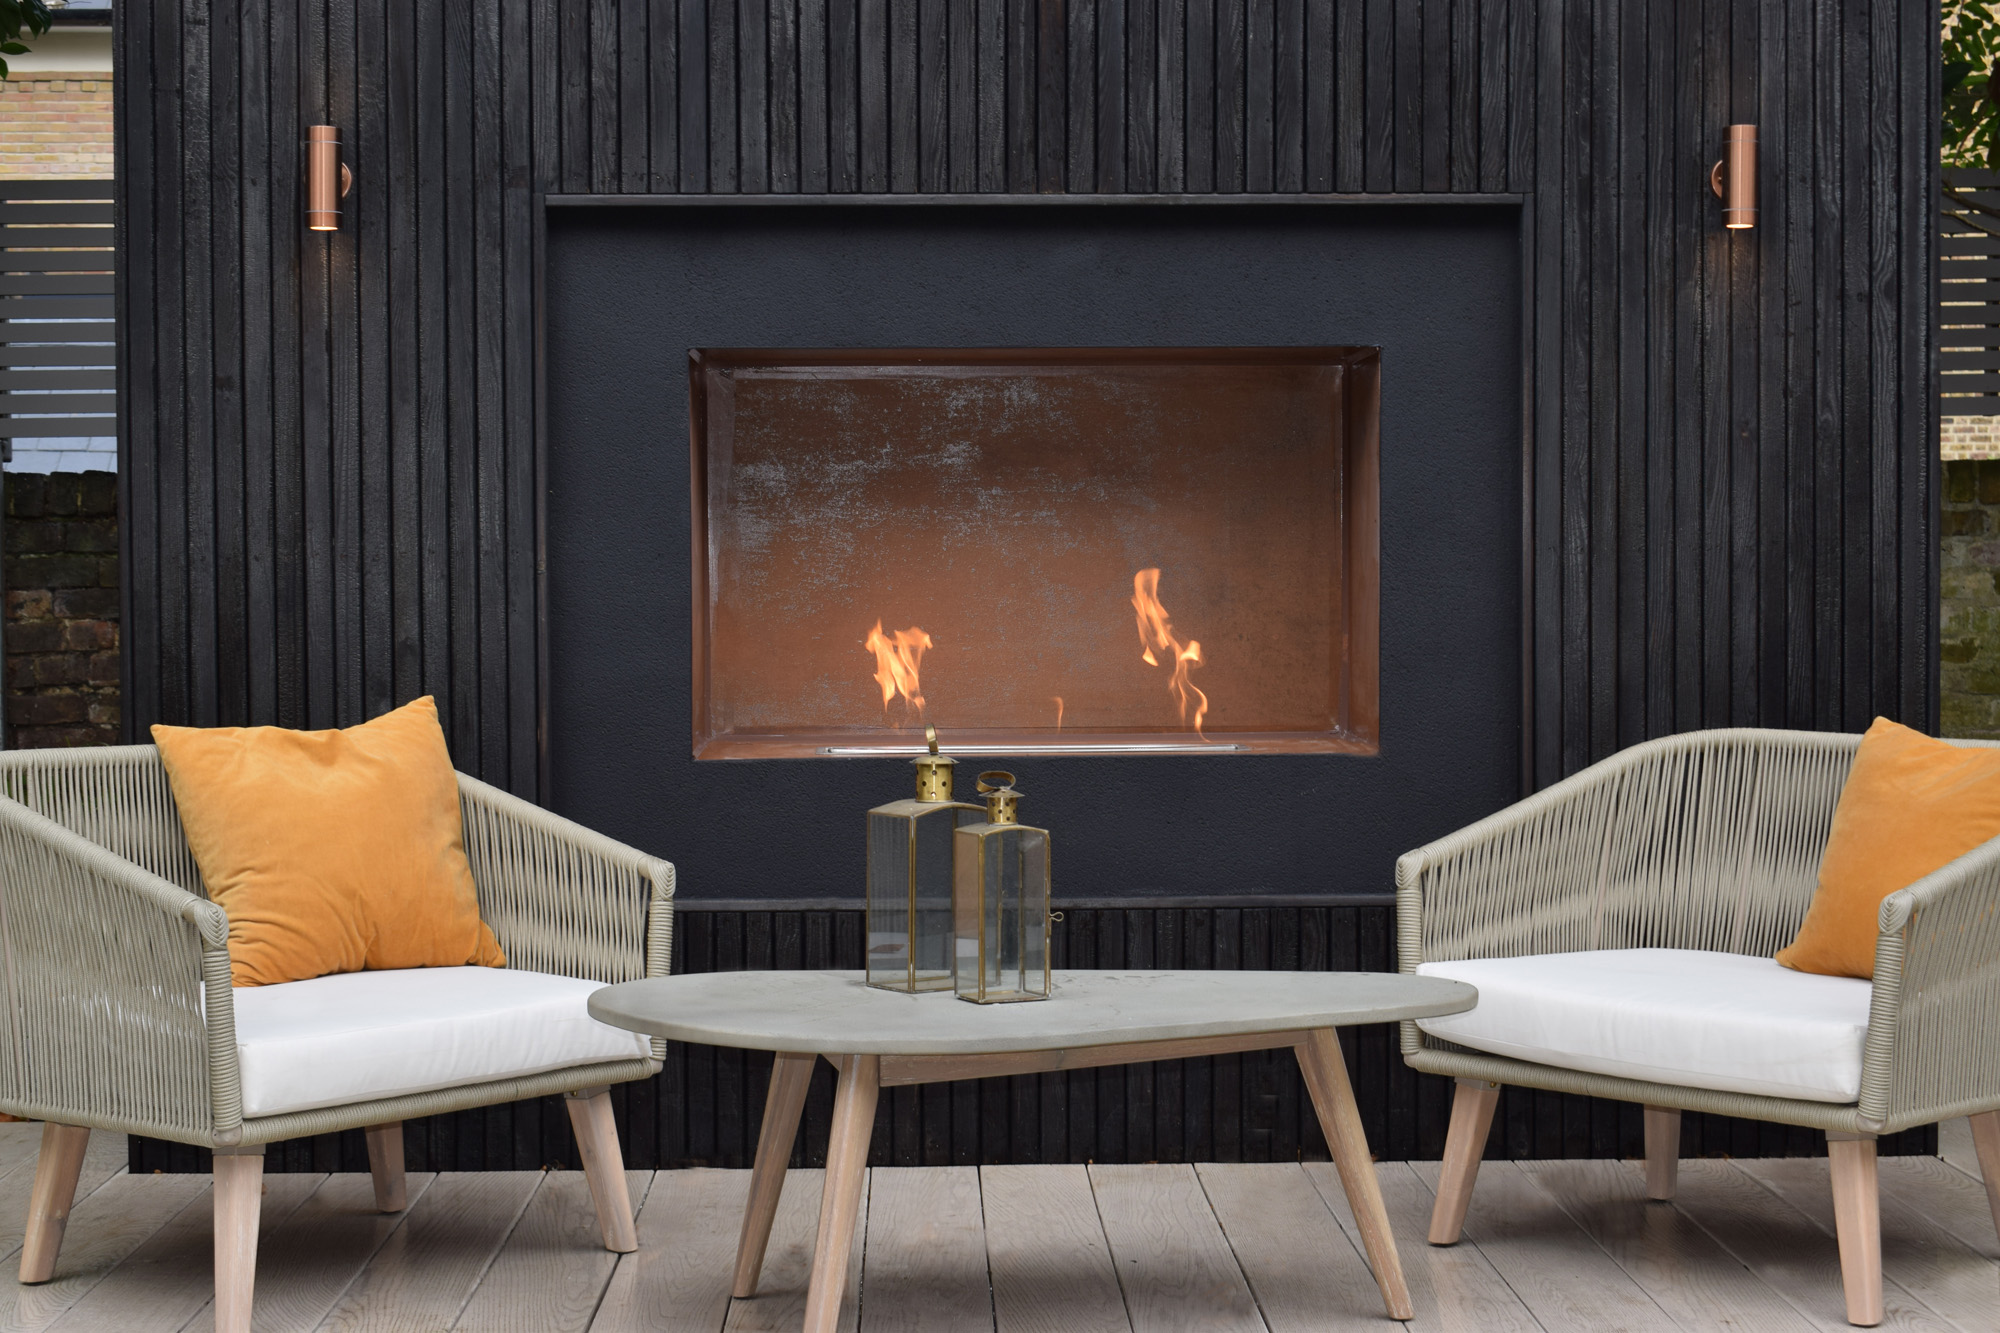 Fireplace by Pollyanna Wilkinson - contemporary landscape and garden design in London